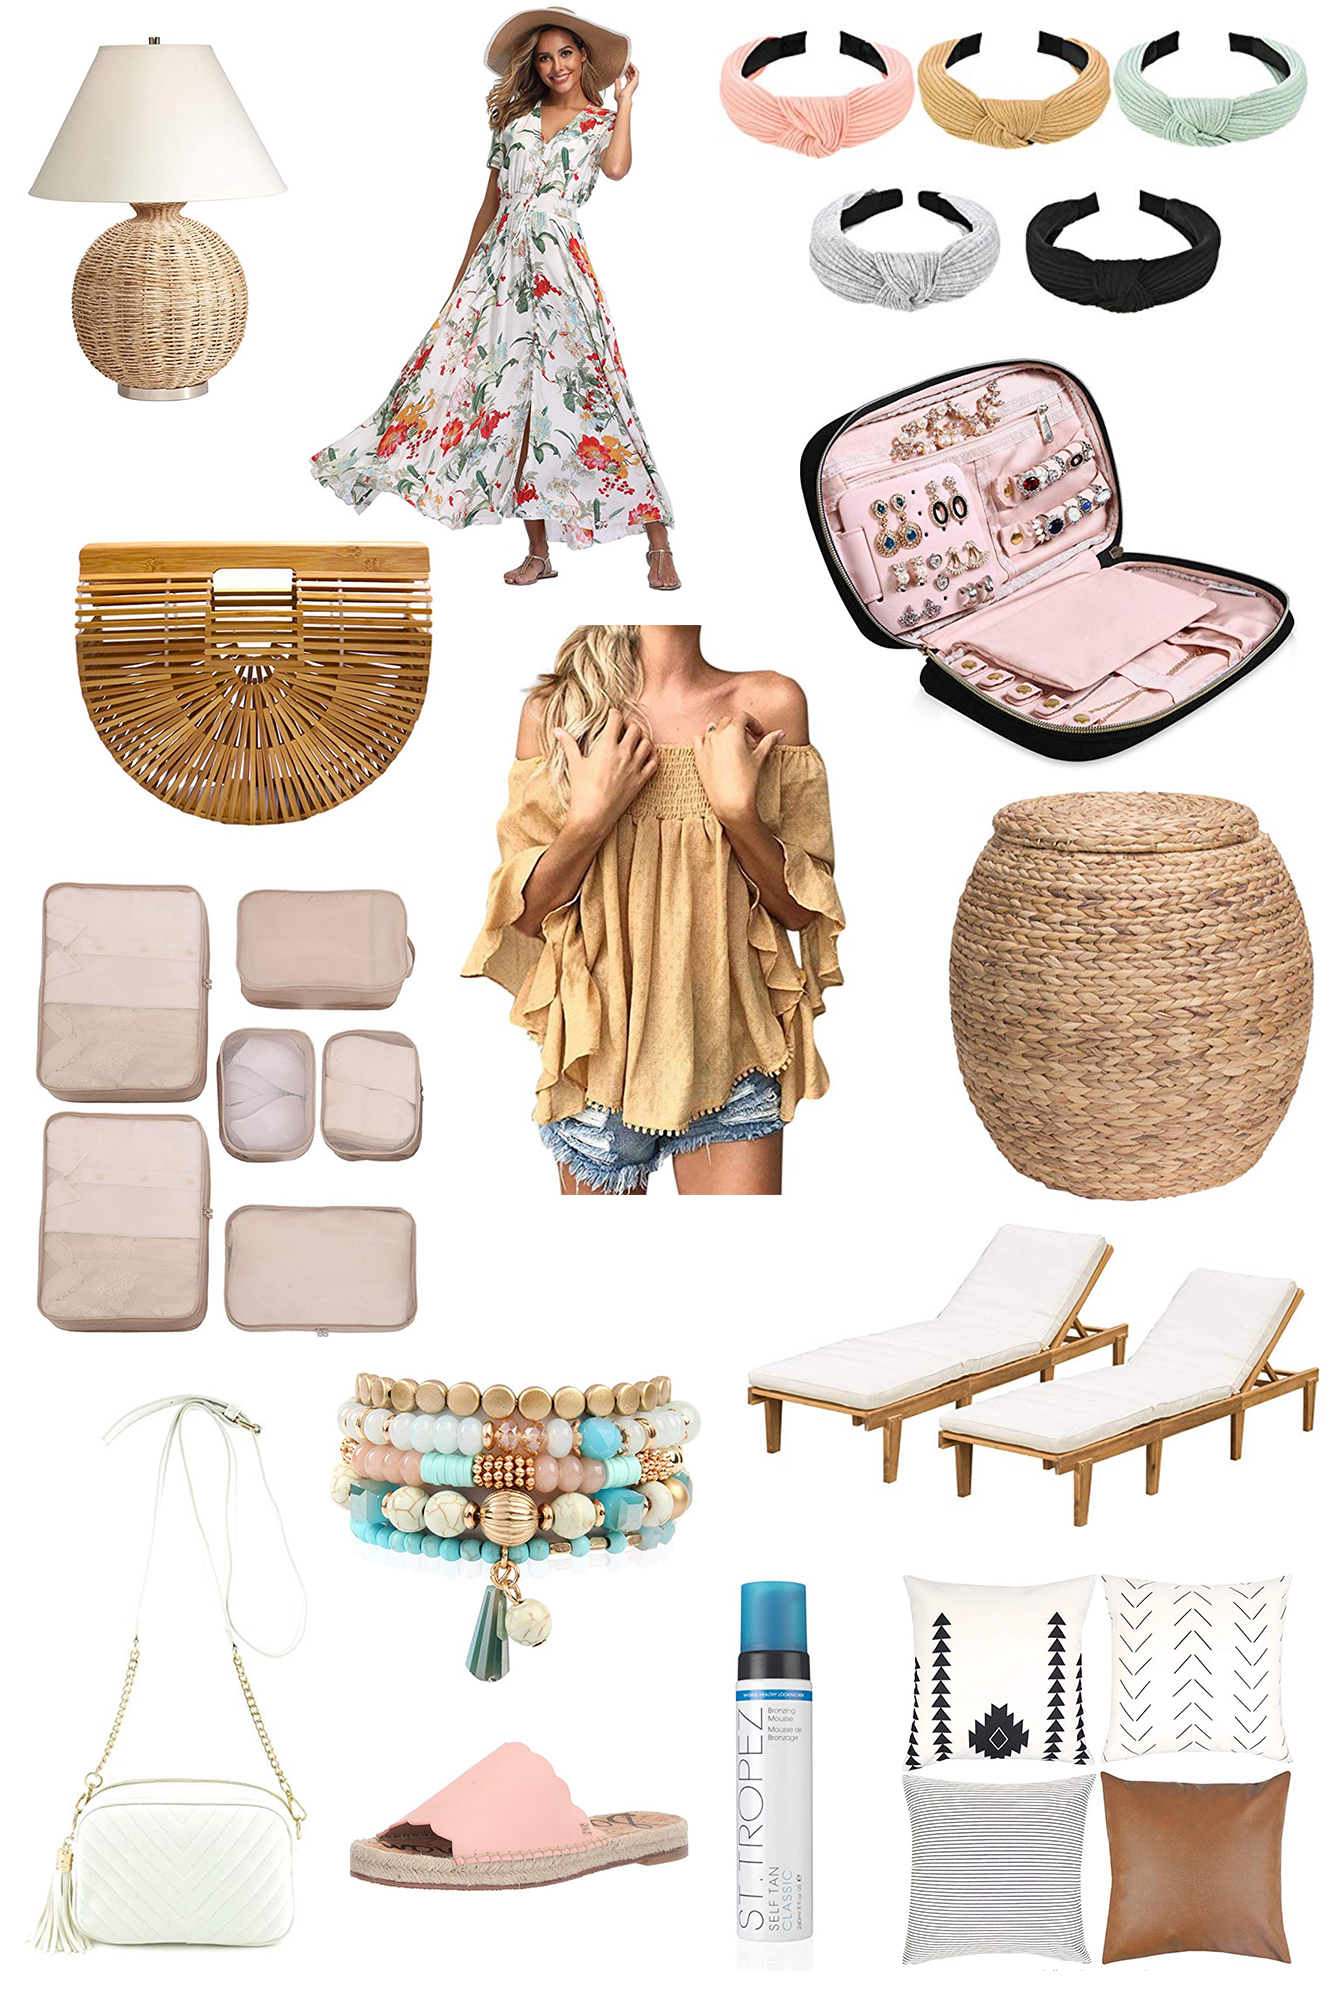 Favorite Amazon Finds - Inexpensive fashion, home decor, and more with many available through prime shipping. | Kristy Wicks